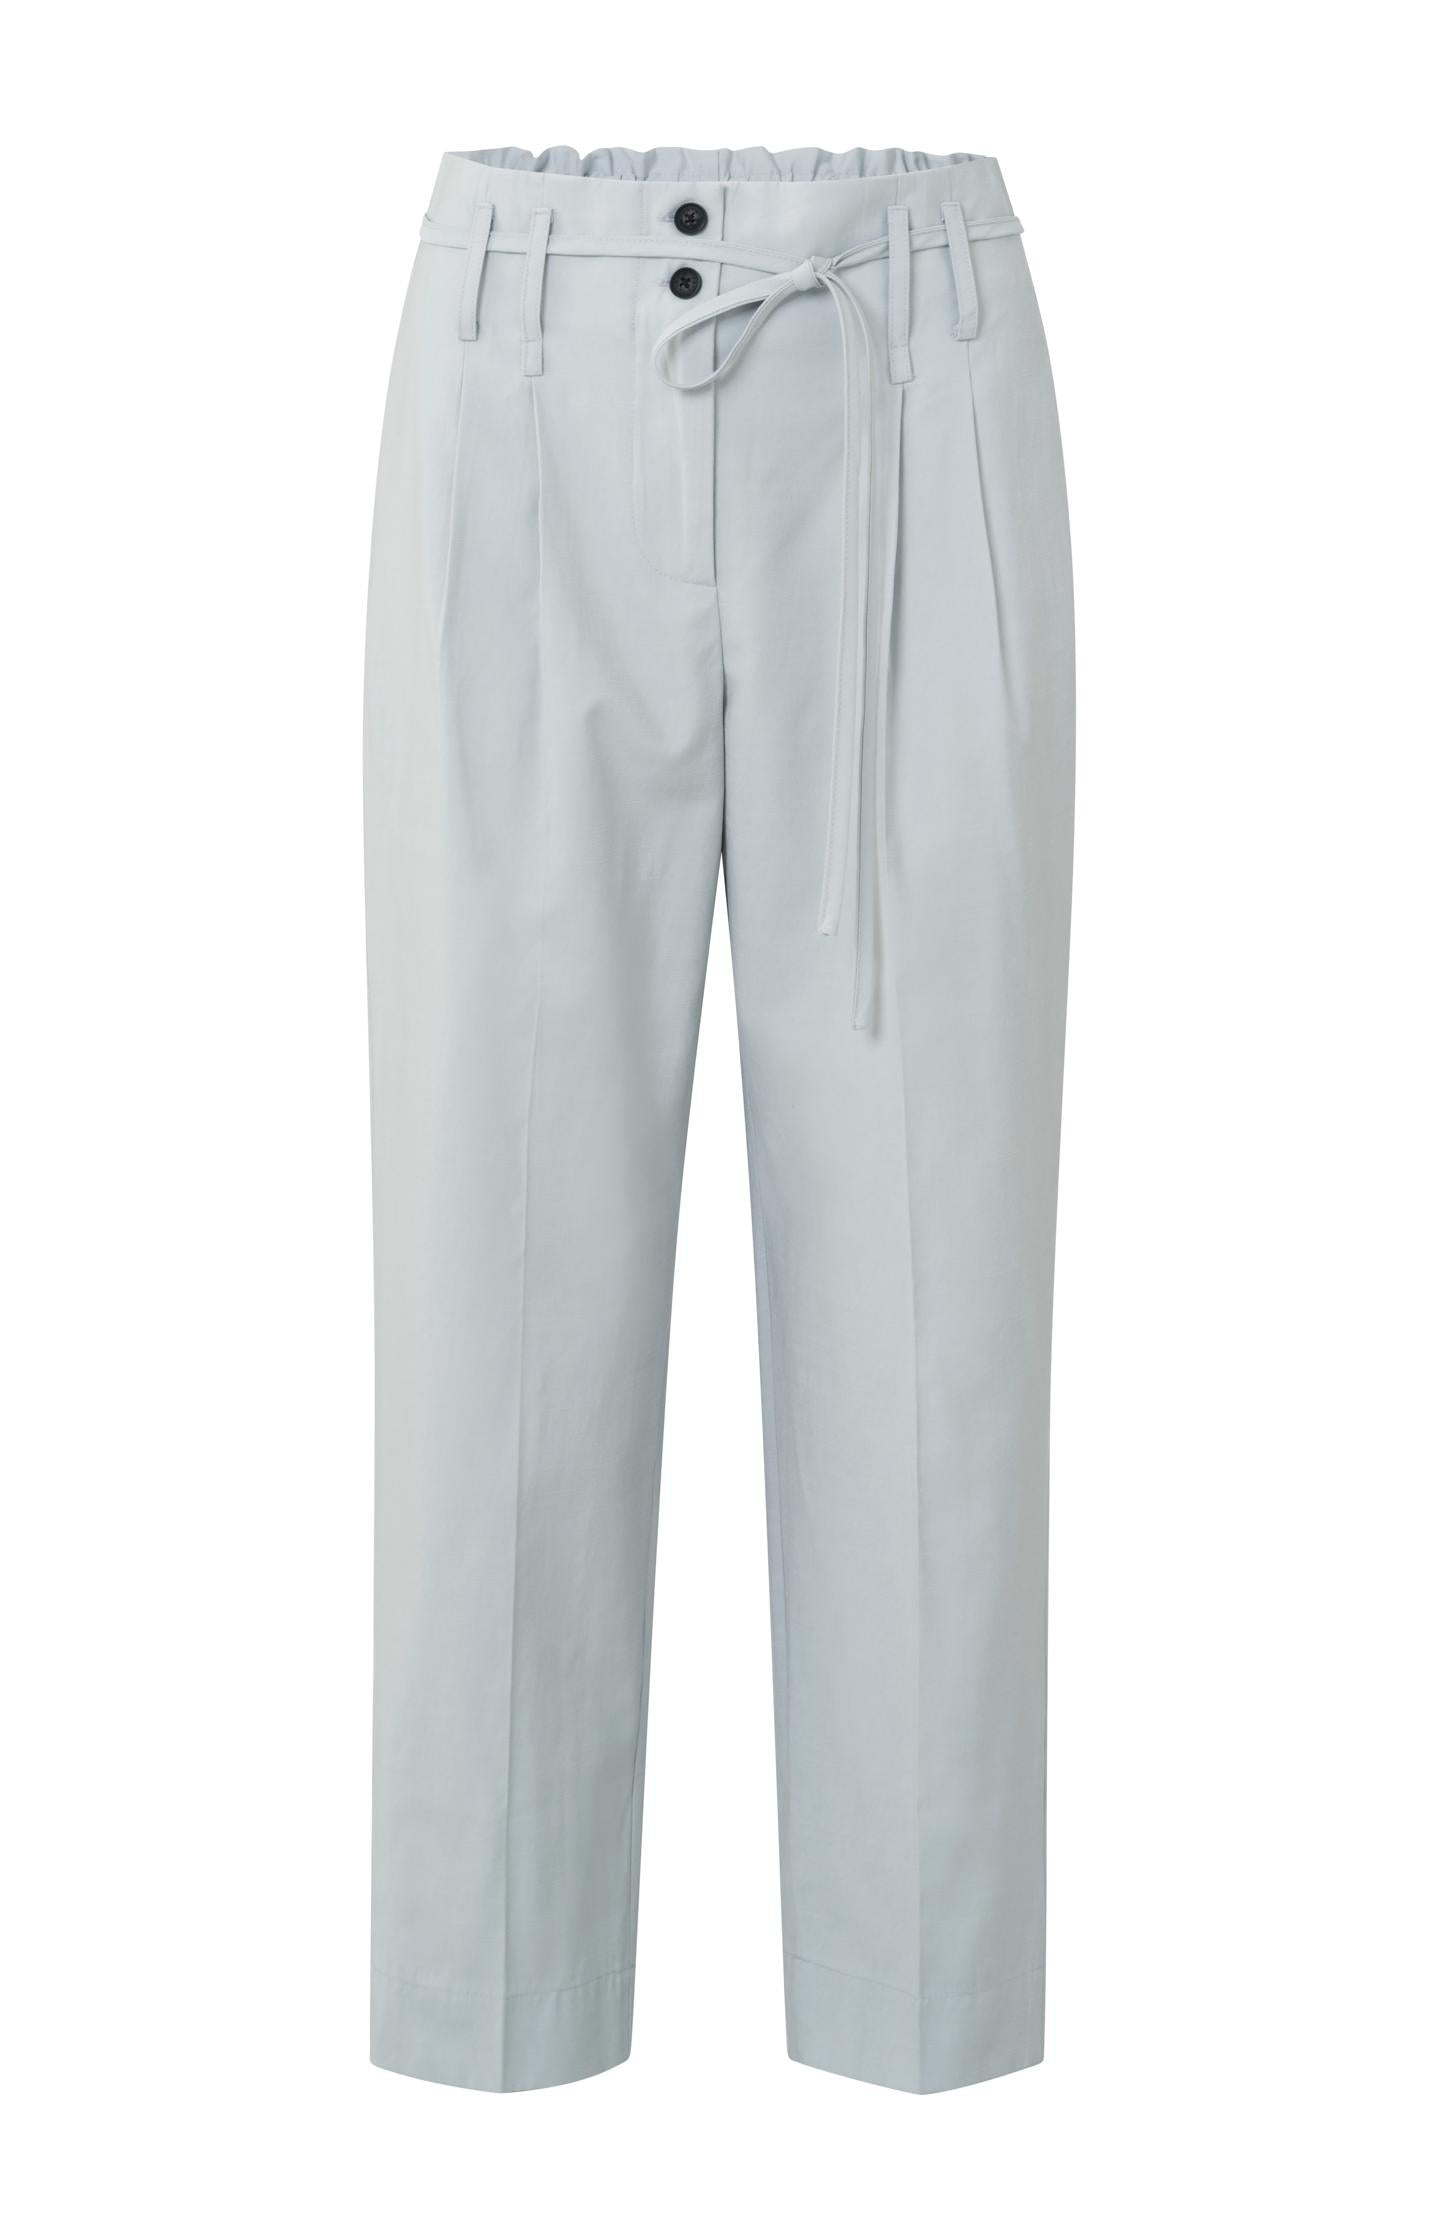 High waist pantalon with zip fly, buttons and pleated detail - Type: product